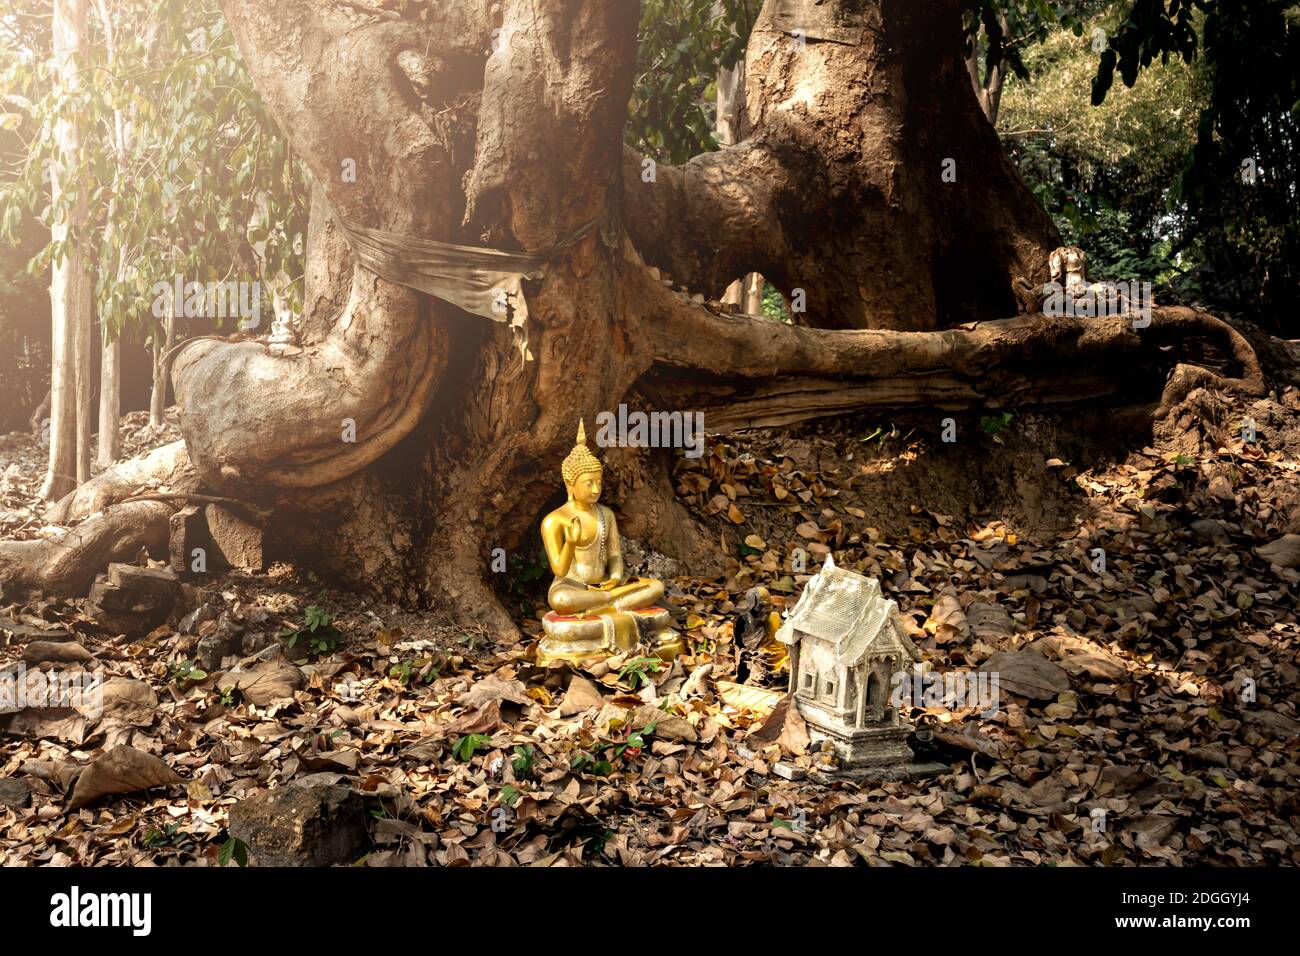 Buddhist statue at the root of a tree Stock Photo